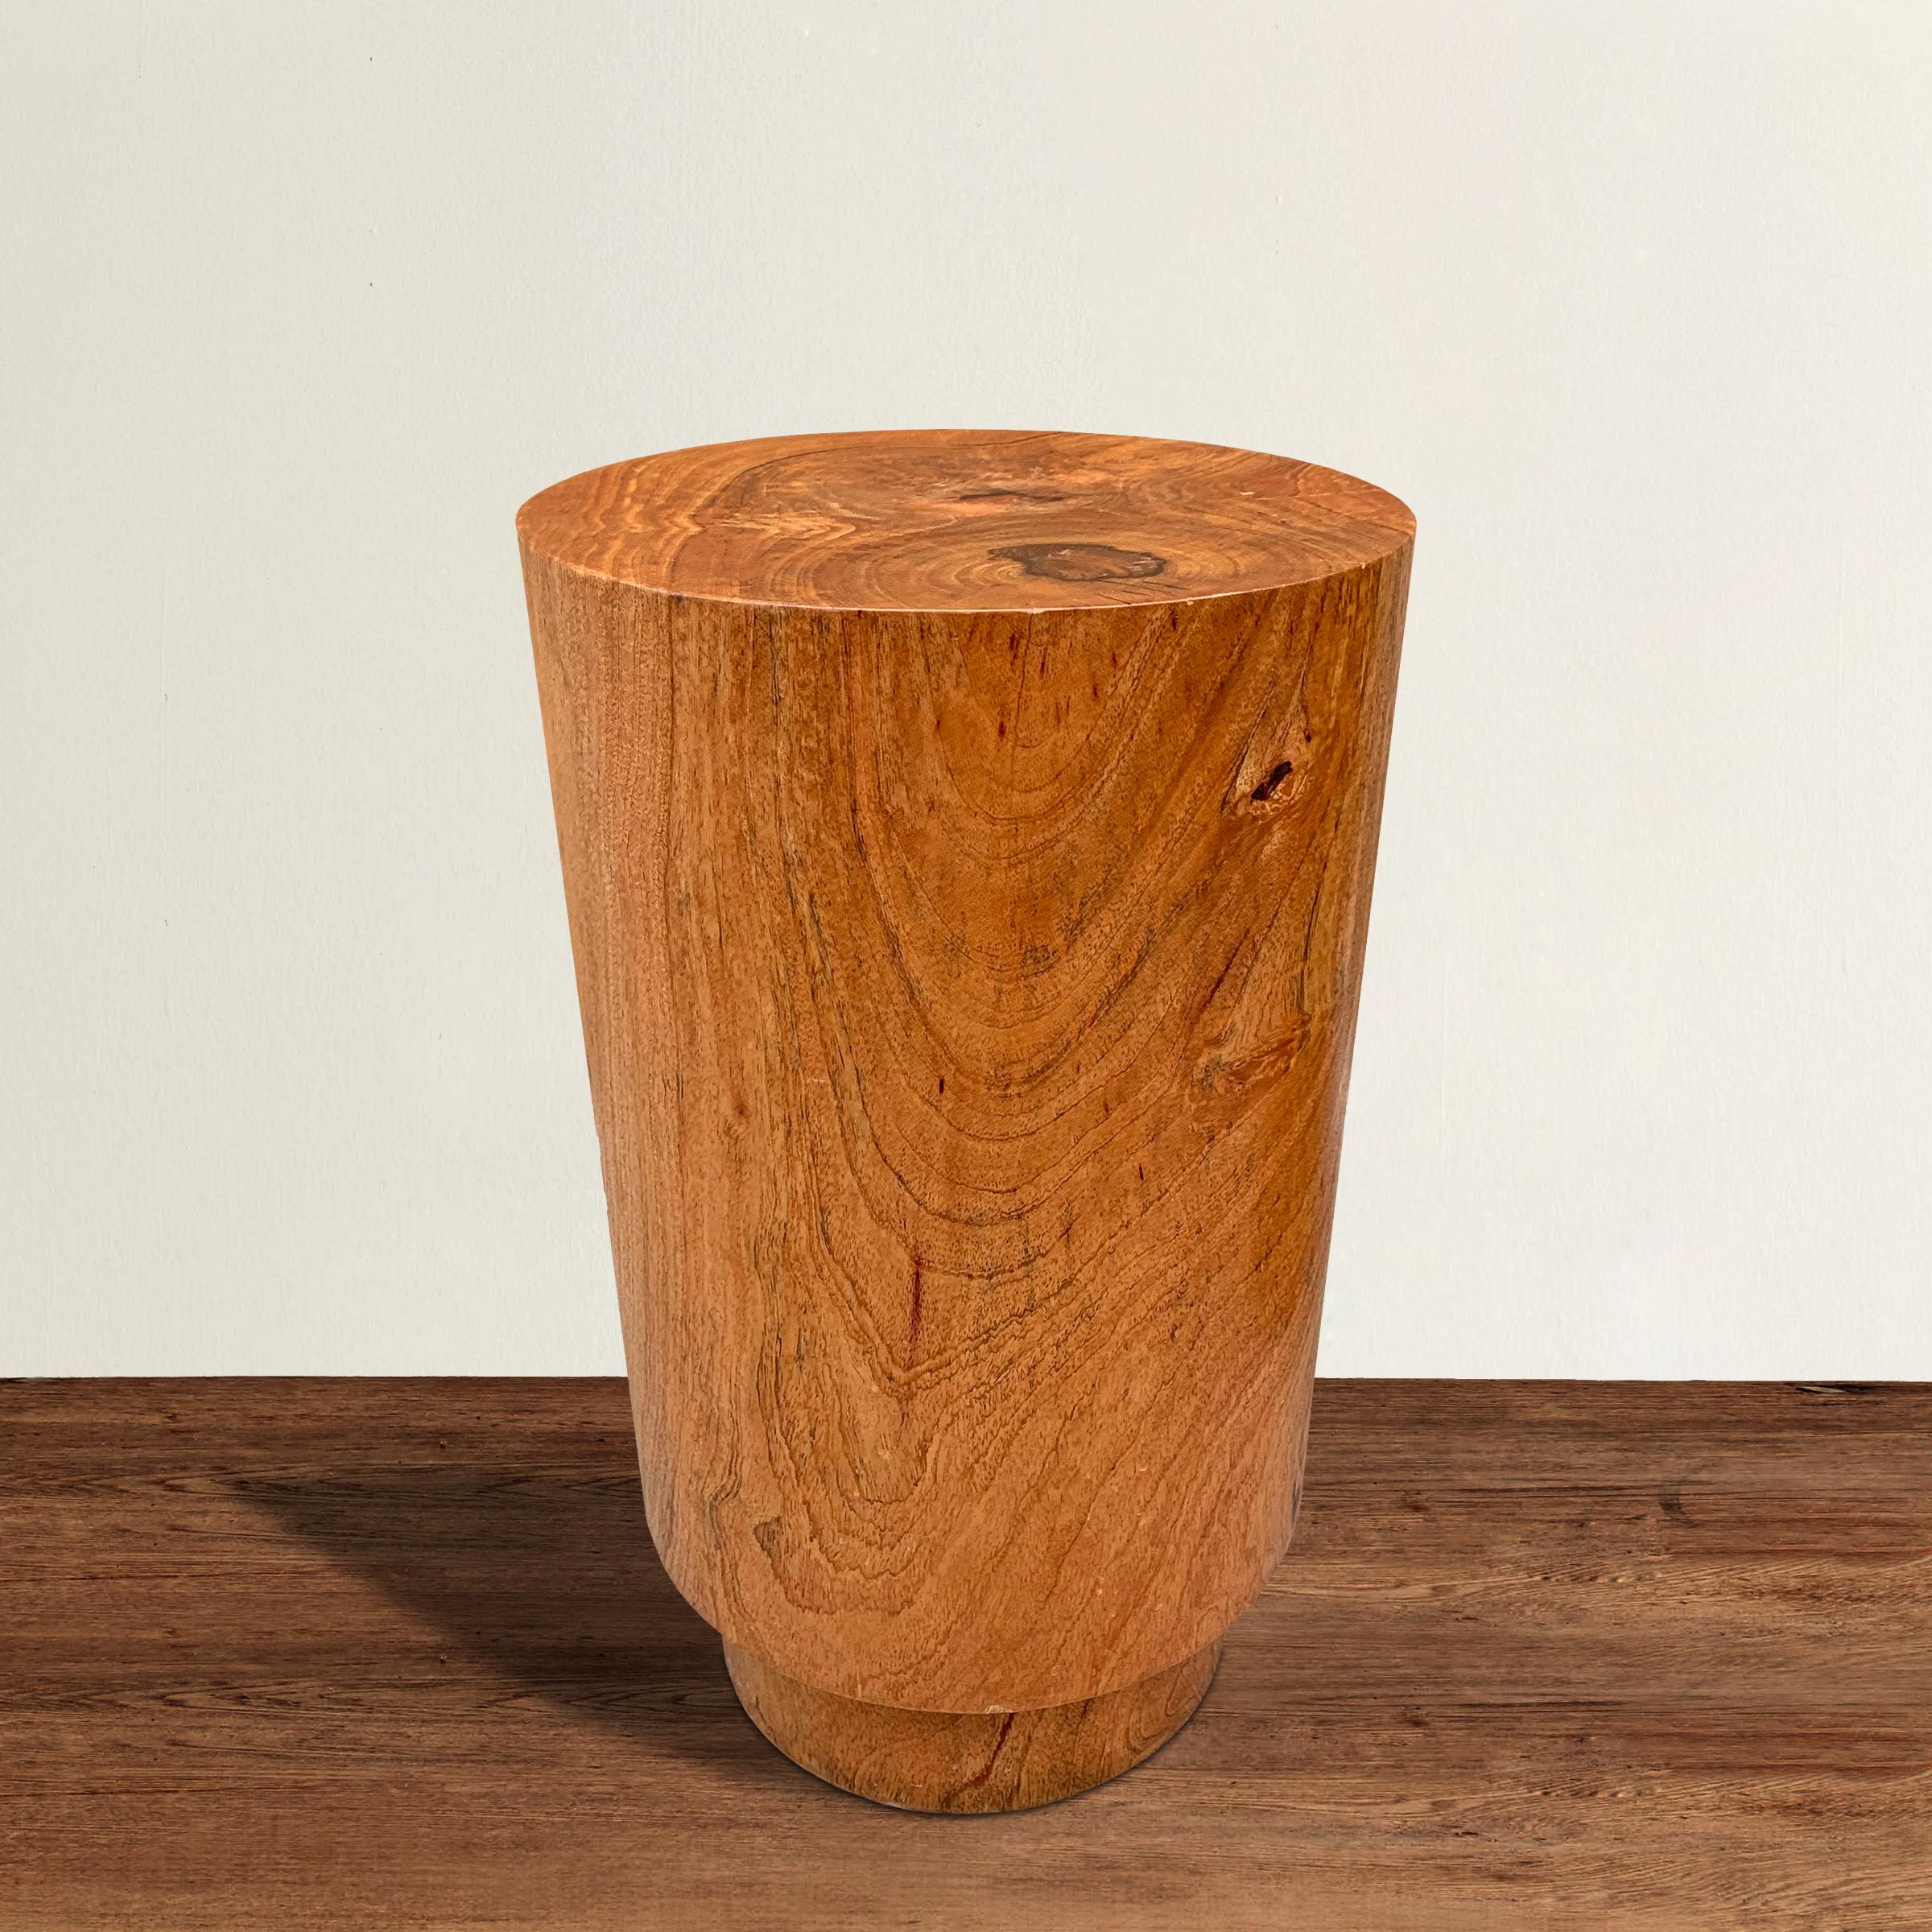 A fantastic modern side table carved of one piece of wood and of cylindrical form with a stepped-back foot. Perfect as a drink's table, side table, or pedestal to show off an objet d'art.